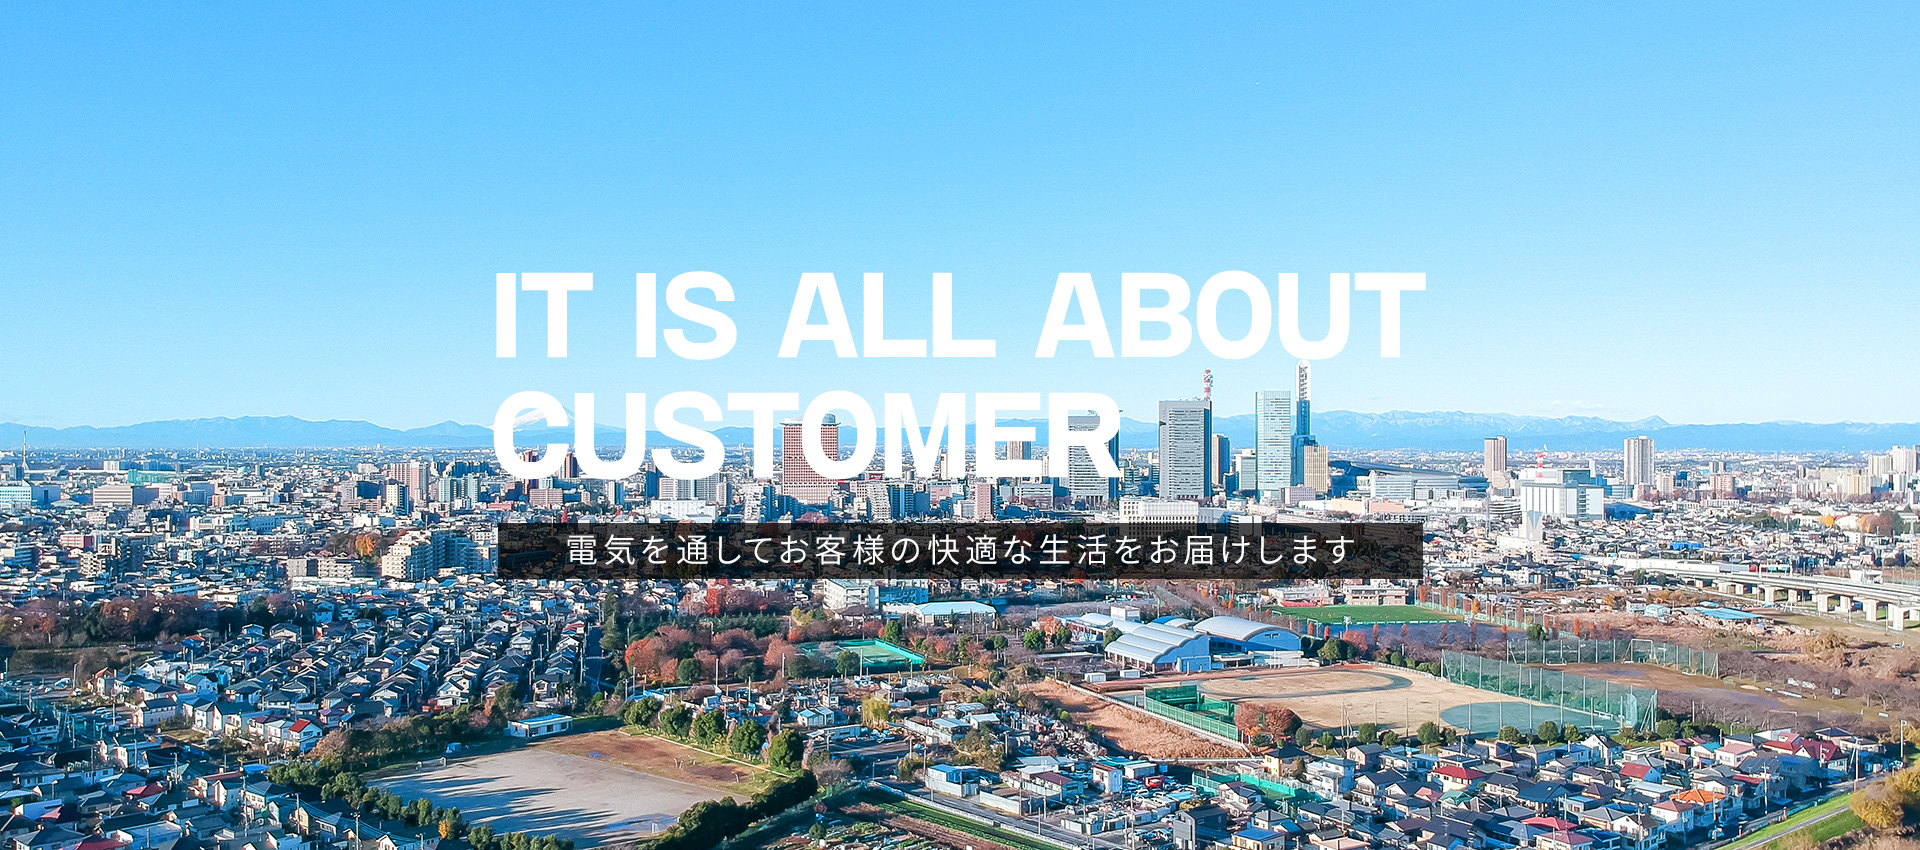 IT IS ALL ABOUT CUSTOMER